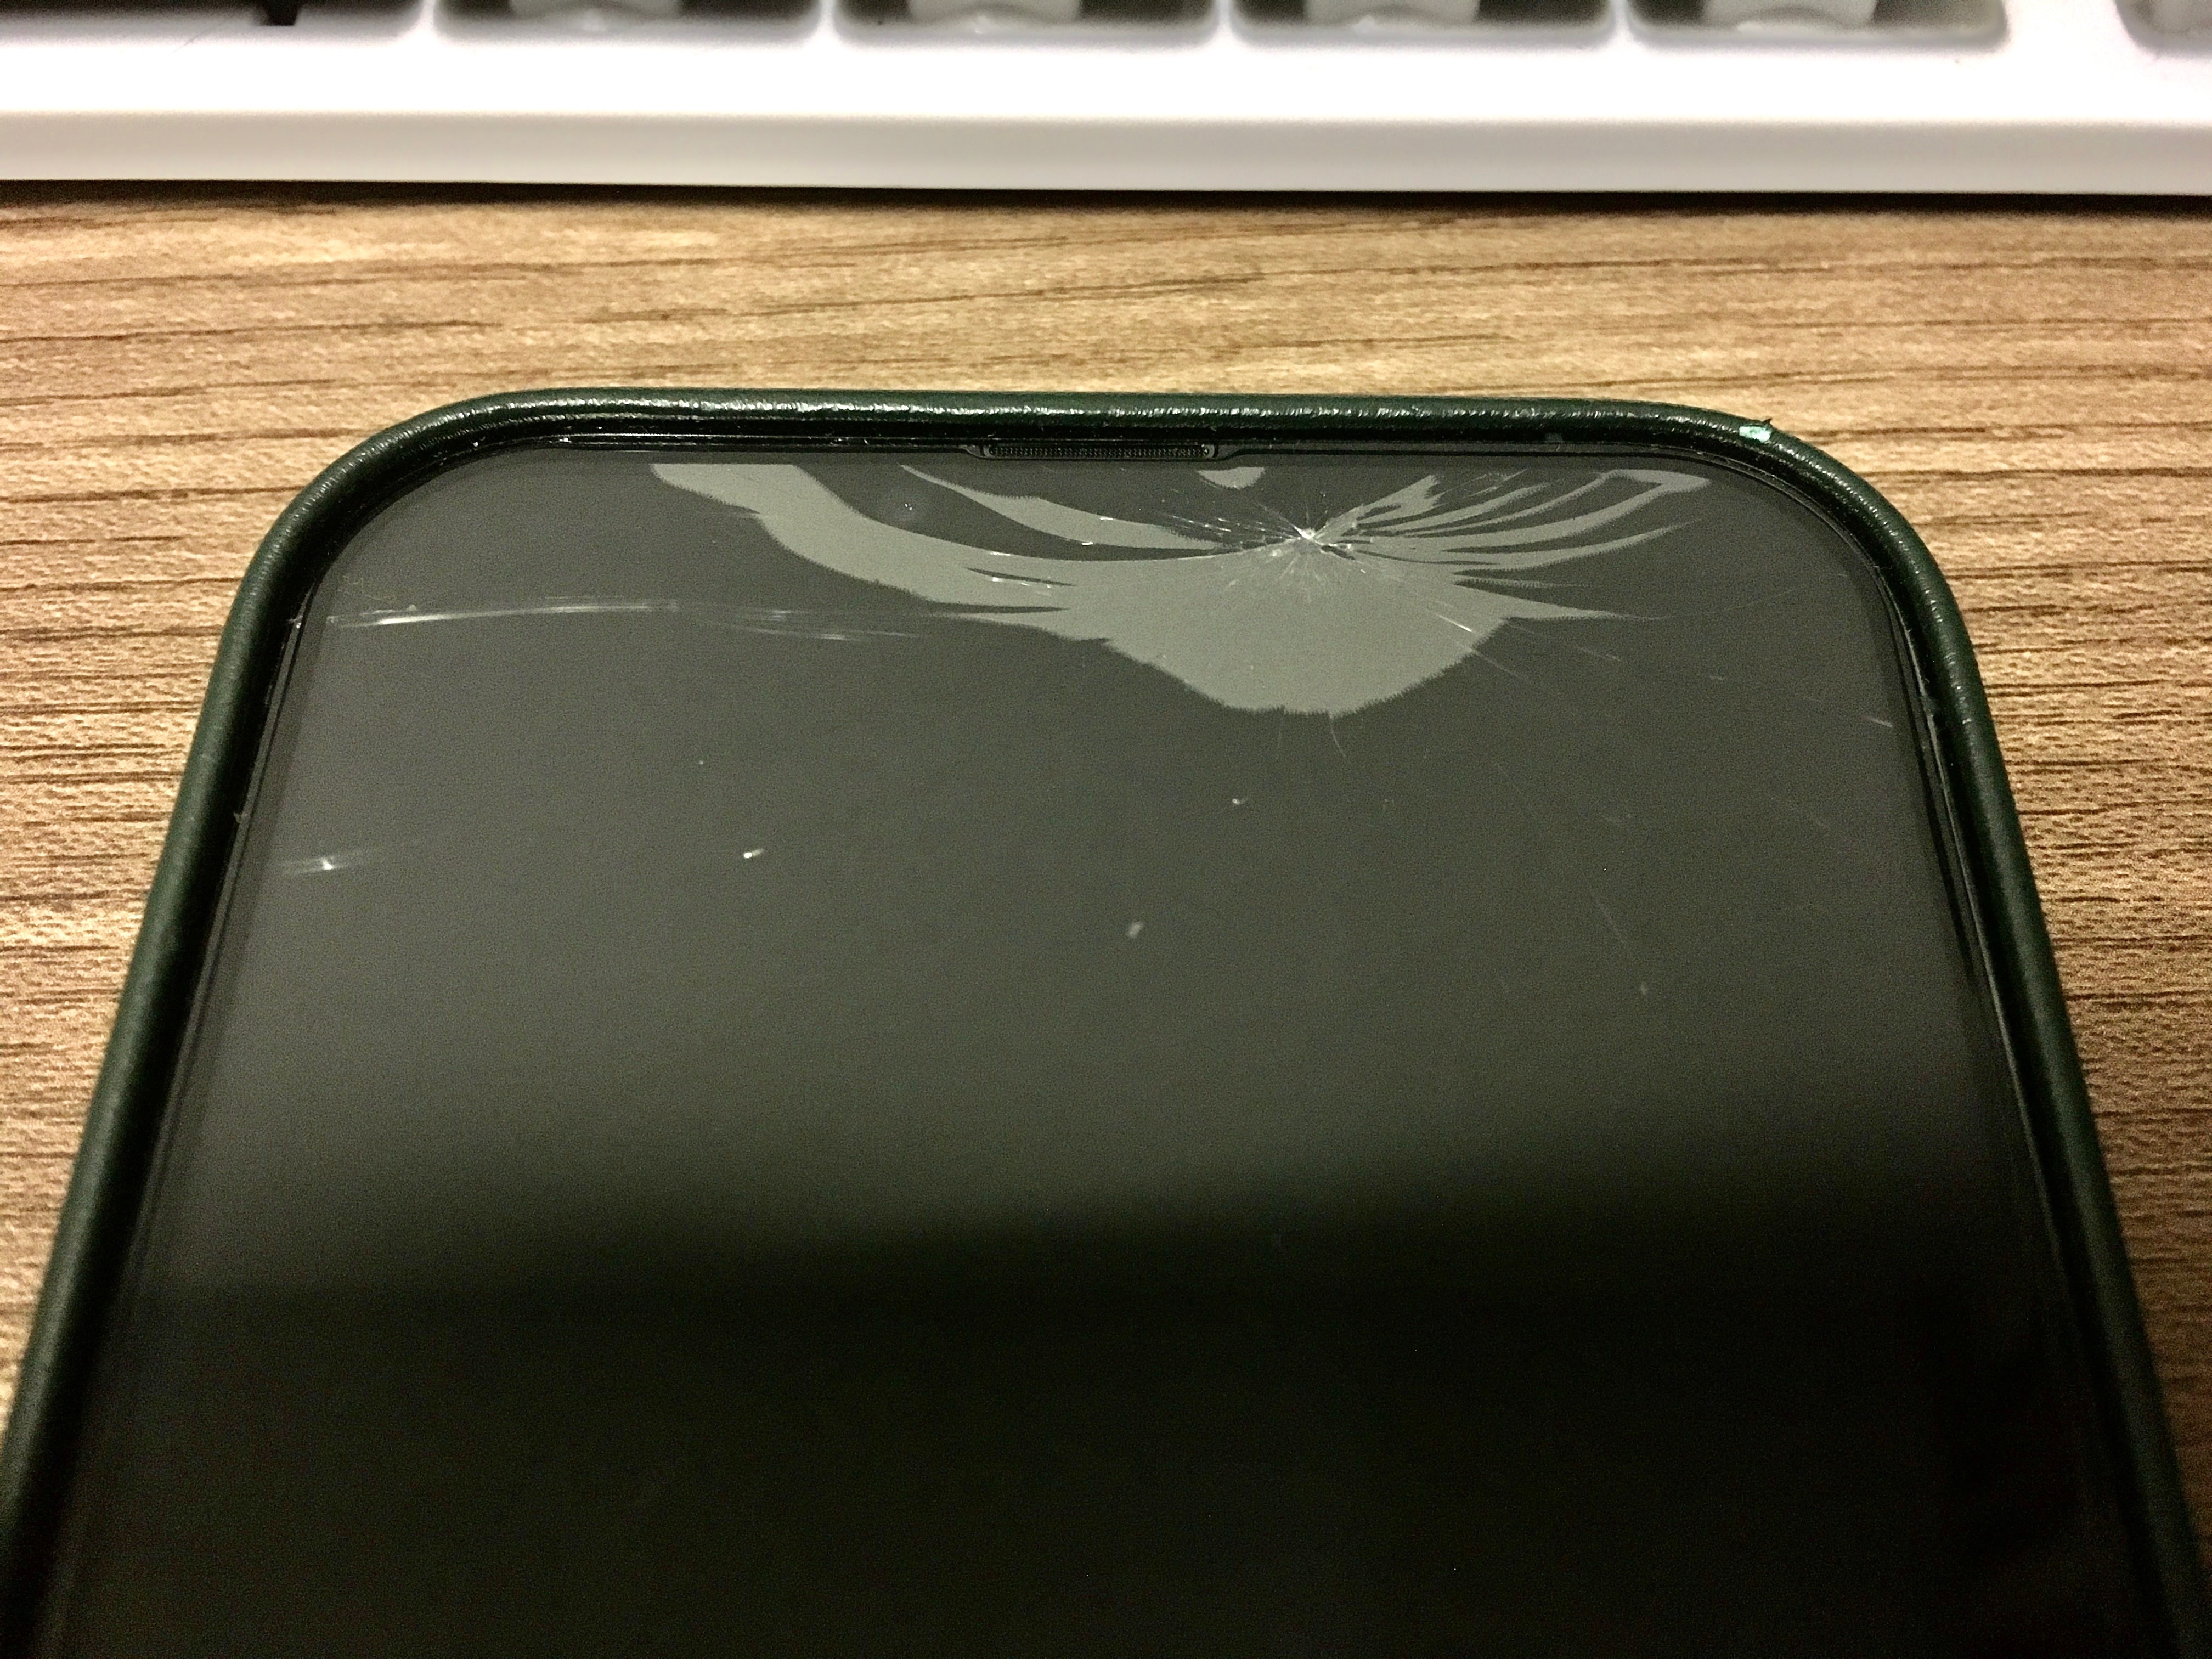 iPhone 13 Pro Max cracked rear glass repl… - Apple Community